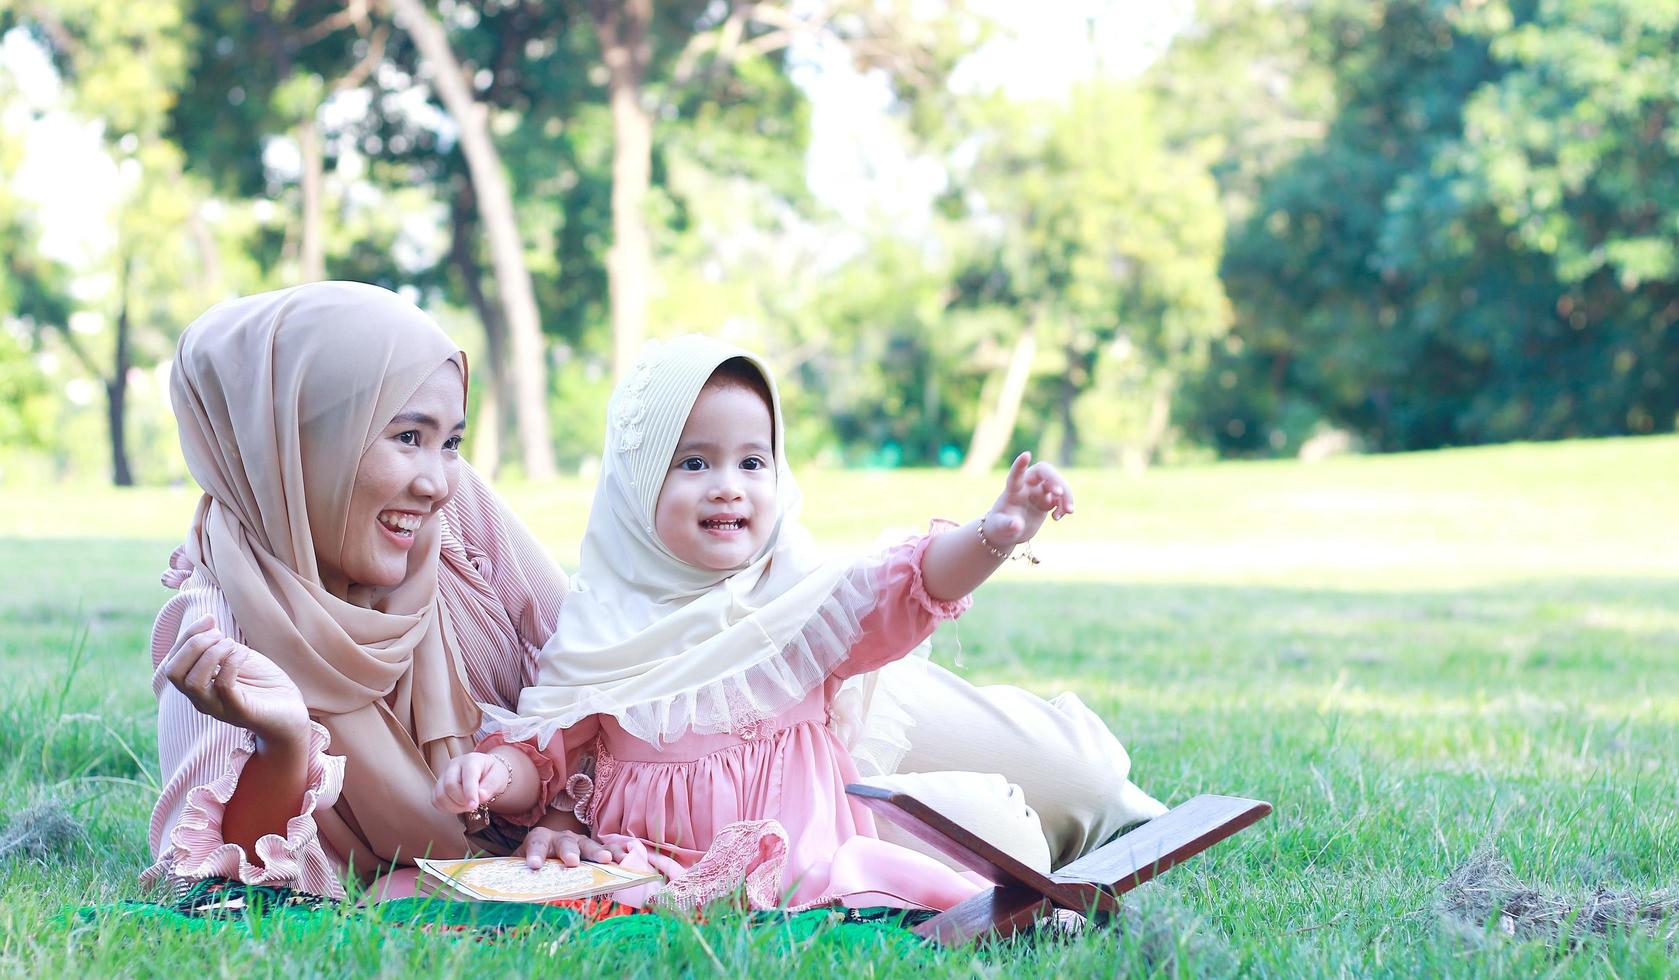 Muslim mother and daughter enjoying their holiday in the park photo